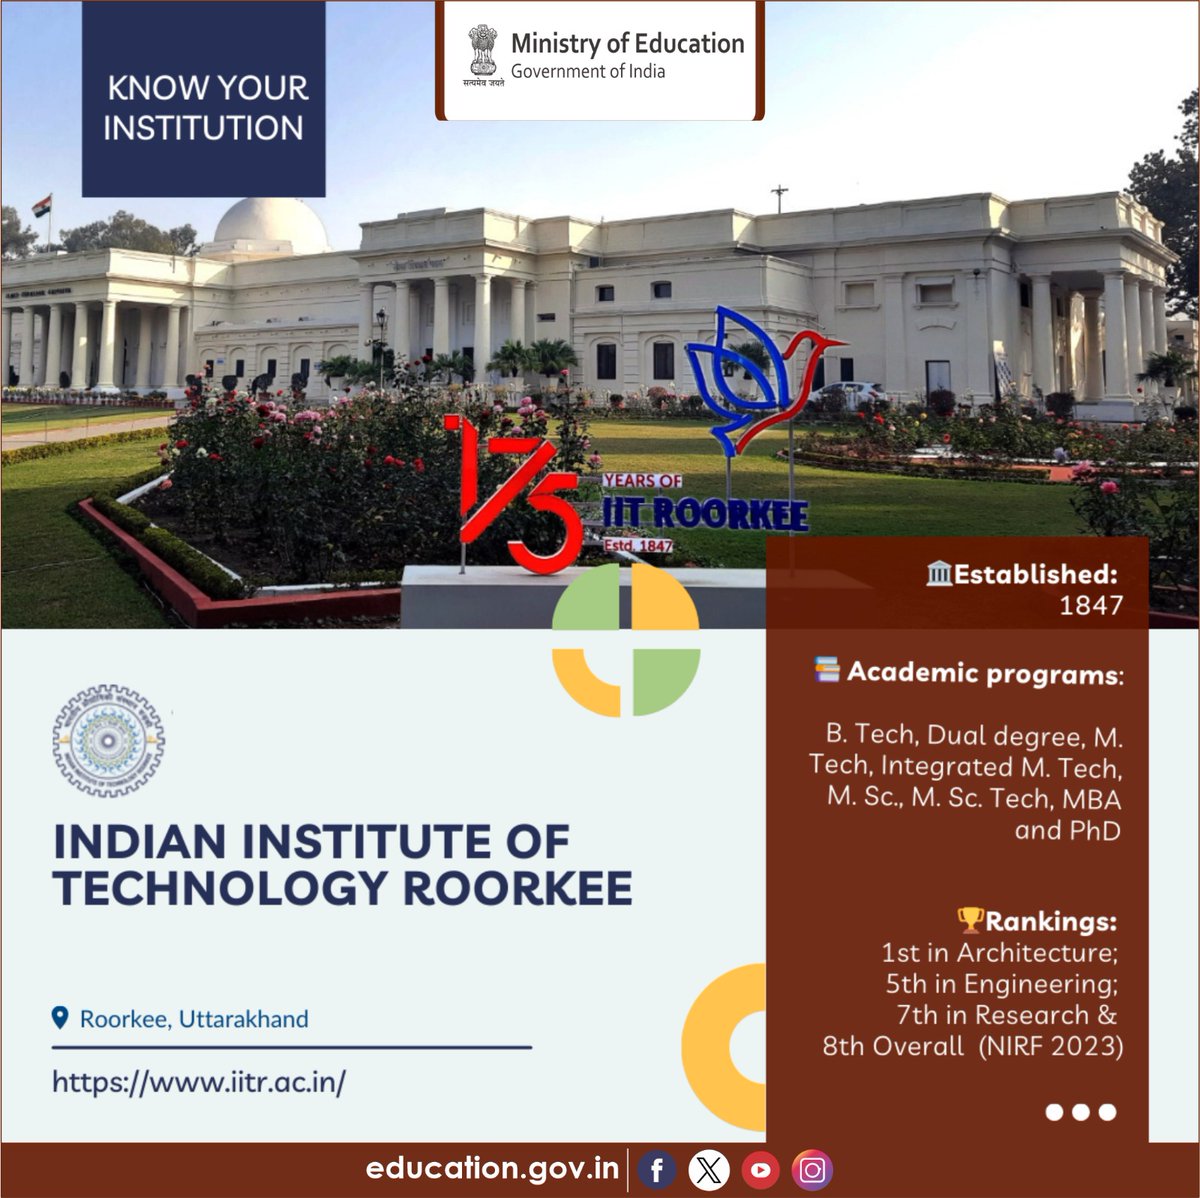 Know about the HEIs of India! Established in 1847 as the first engineering college in India, the Indian Institute of Technology, Roorkee has played a pivotal role in shaping India's technical human resources and knowledge base. @iitroorkee has achieved several milestones since